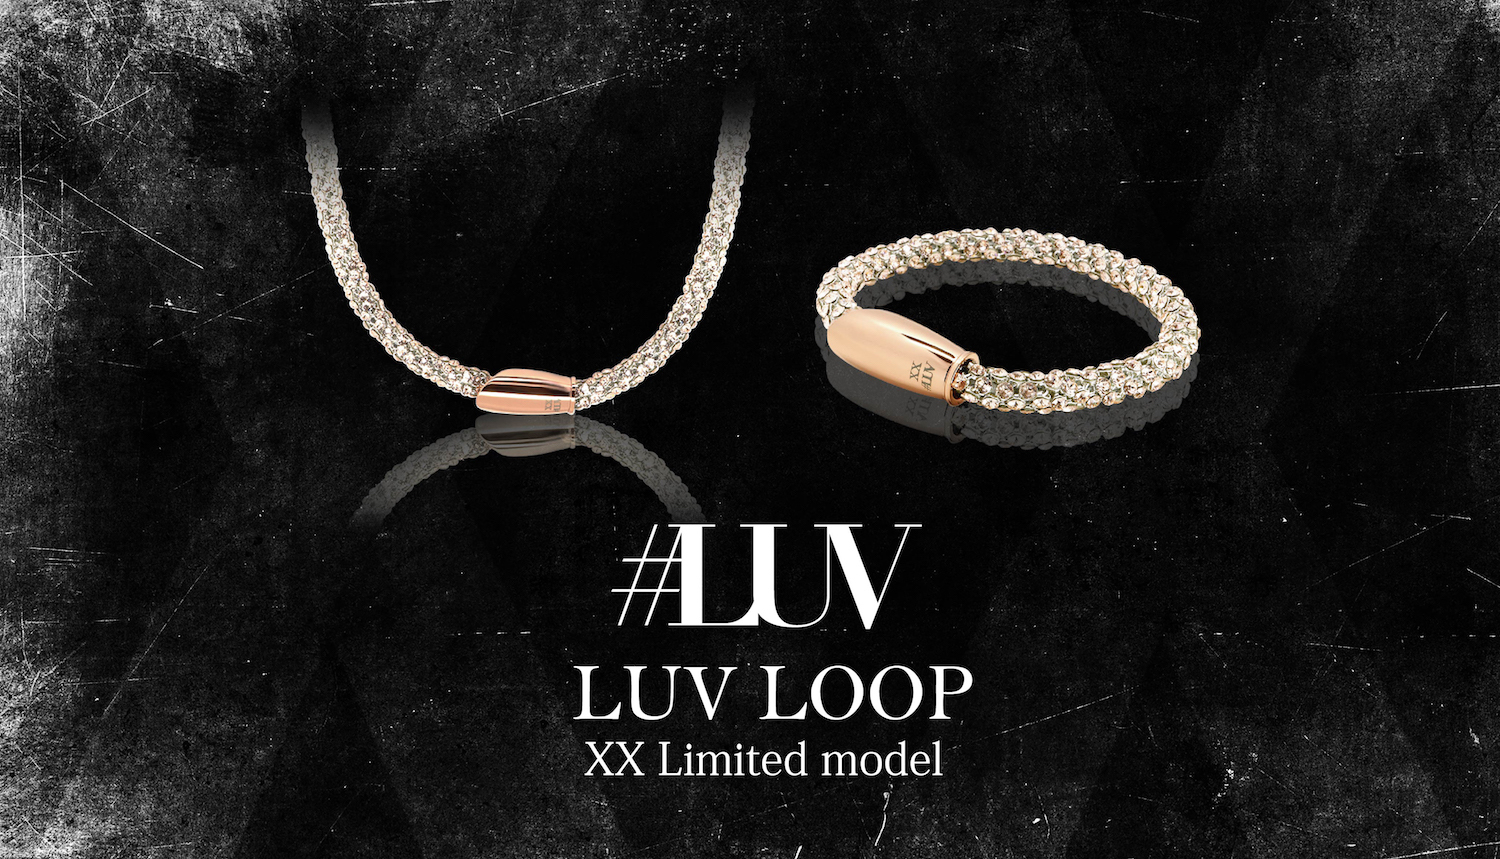 LUV「XX LIMITED MODEL」を期間限定で販売！ | GACKT OFFICIAL WEBSITE